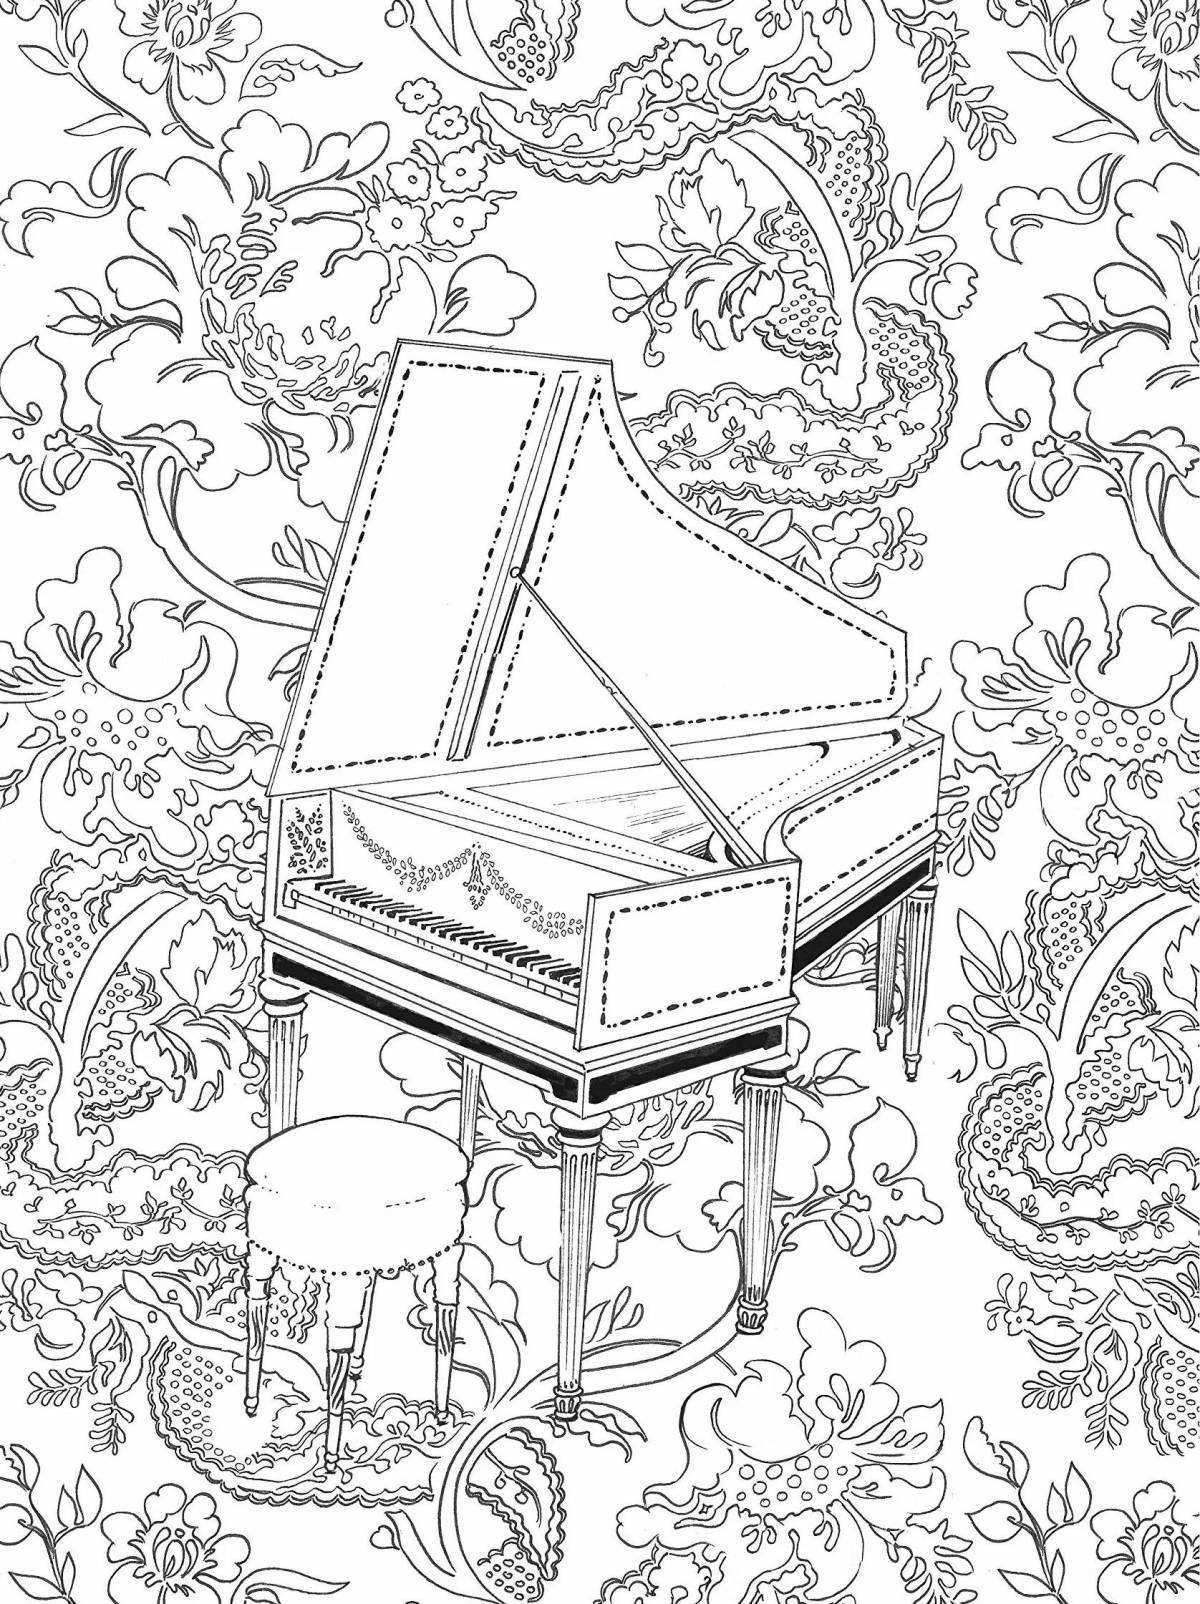 Charming musical coloring book